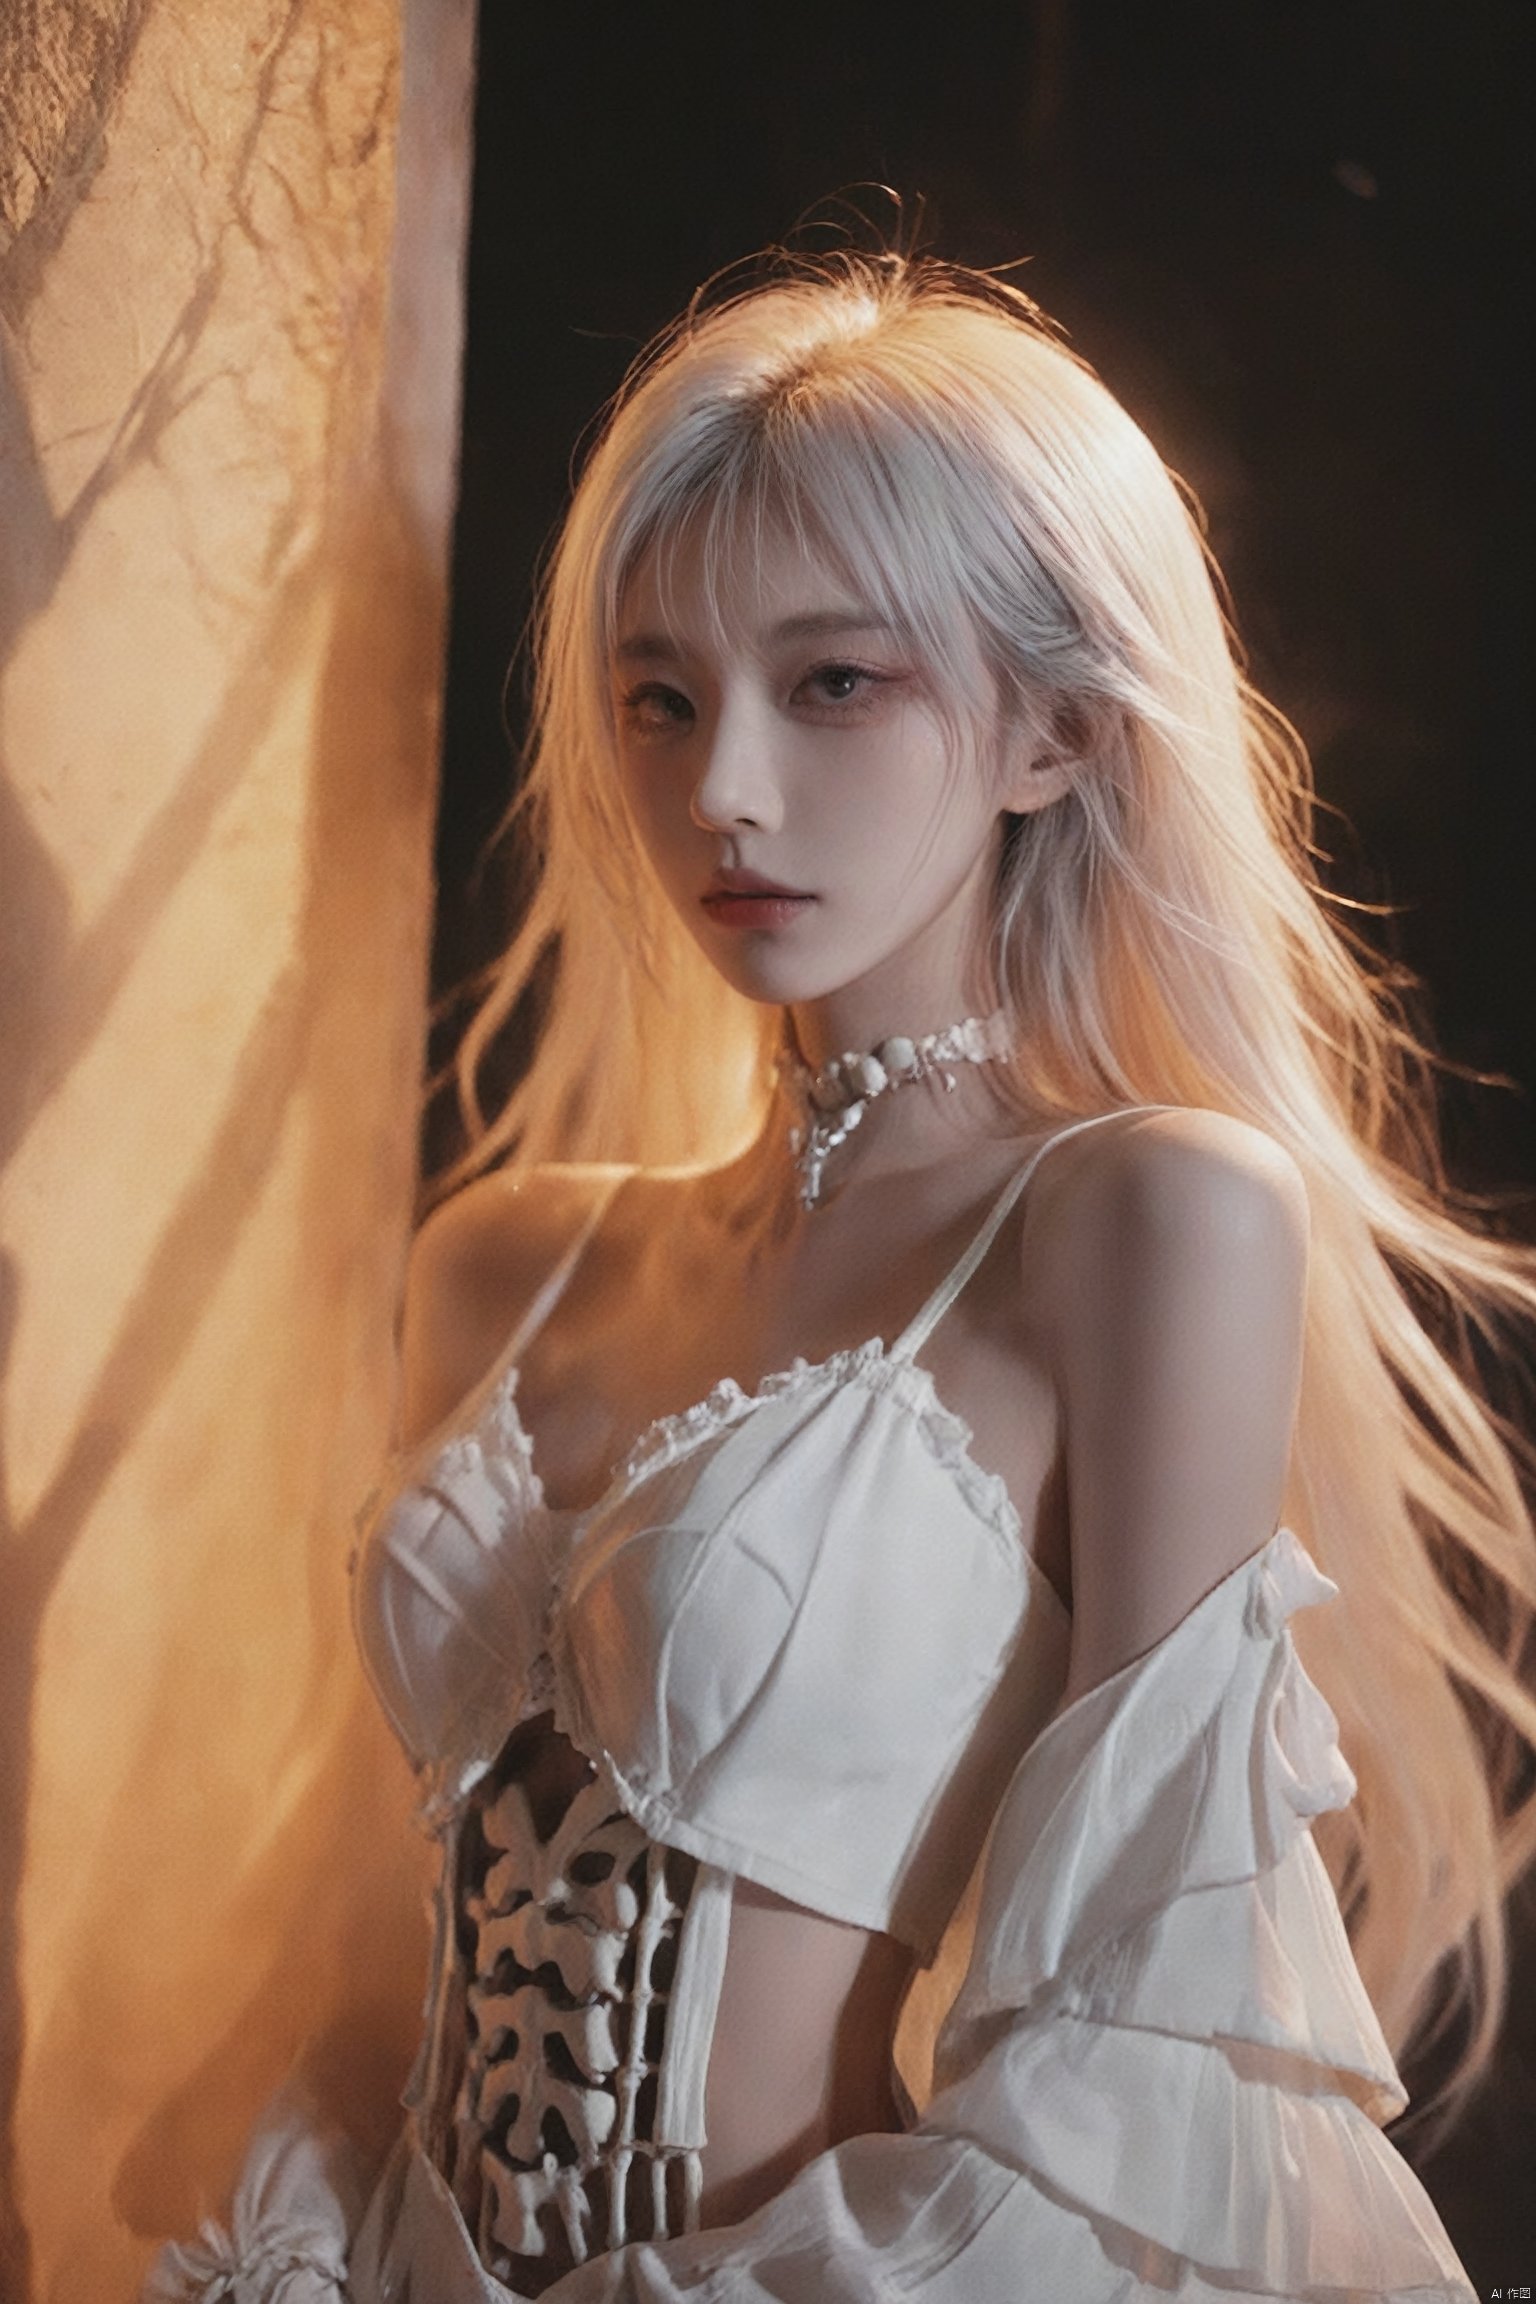  Masterpiece,high quality,(solo:1.2),((1girl)),(((human skeleton | girl))),(white hair:0.3),cinematic light,orange clothes,detailed environment,1girl,solo,reflection,upper body,sunlight,(White hair:1.2),very long hair,wide sleeves,Deep photo,depth of field,shadows,messy hair,seductive silhouette play,dark,nighttime,dark photo,grainy,dimly lit,bangs,Cinematic Lighting,Tyndall effect,abstract background,vibrant colors,modern style,artistic,dynamic composition,unique patterns,bold textures,colorful,lively,youthful,energetic,creative,expressive,stylish,trendy,white_marble_glowing_skin, hubg_jsnh